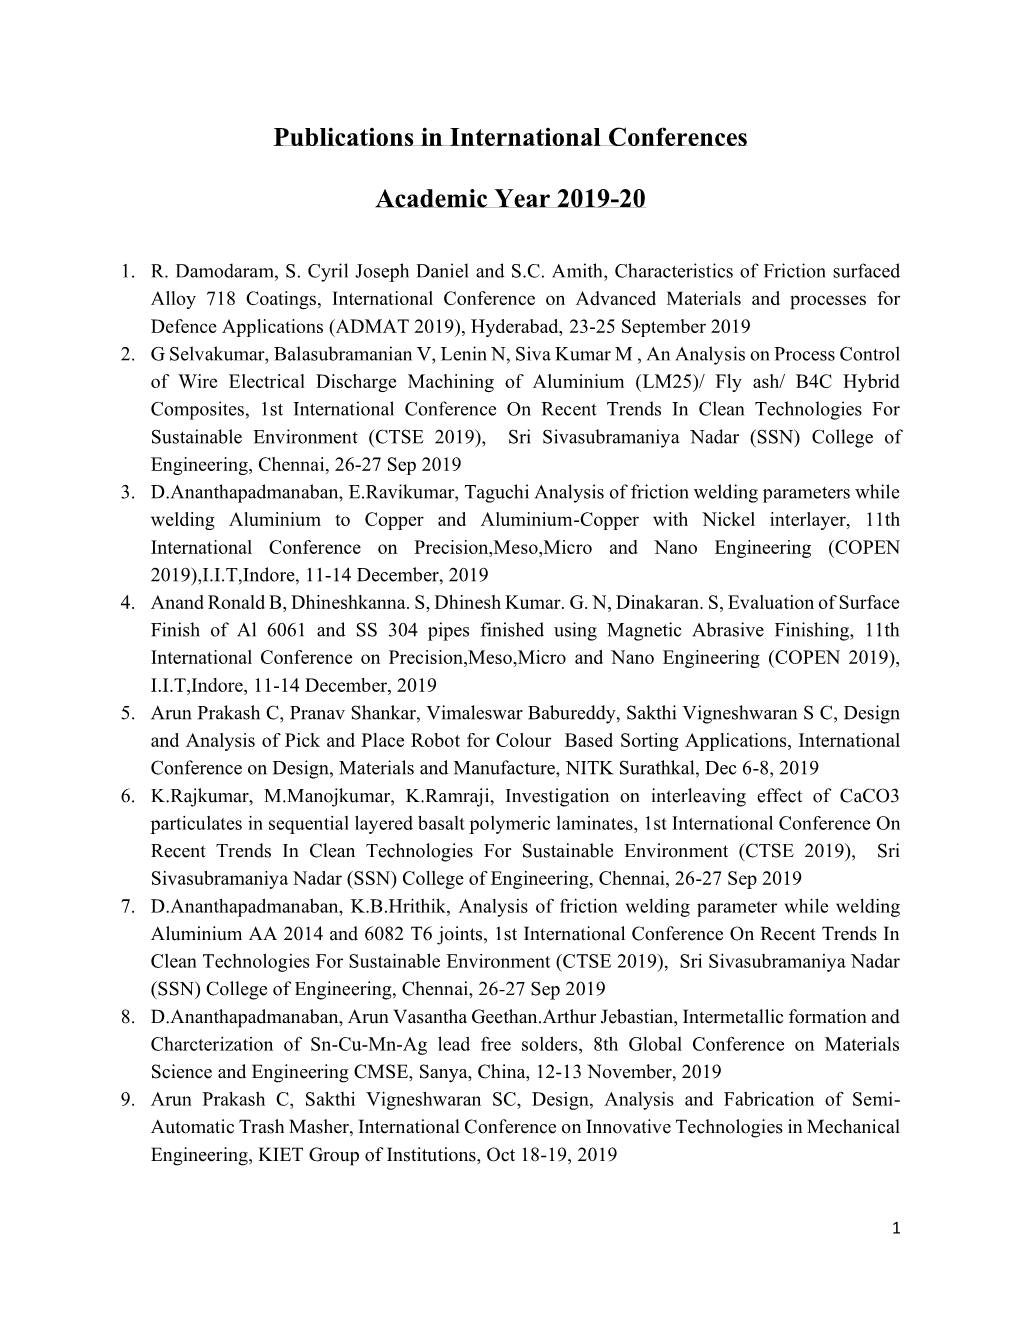 Publications in International Conferences Academic Year 2019-20